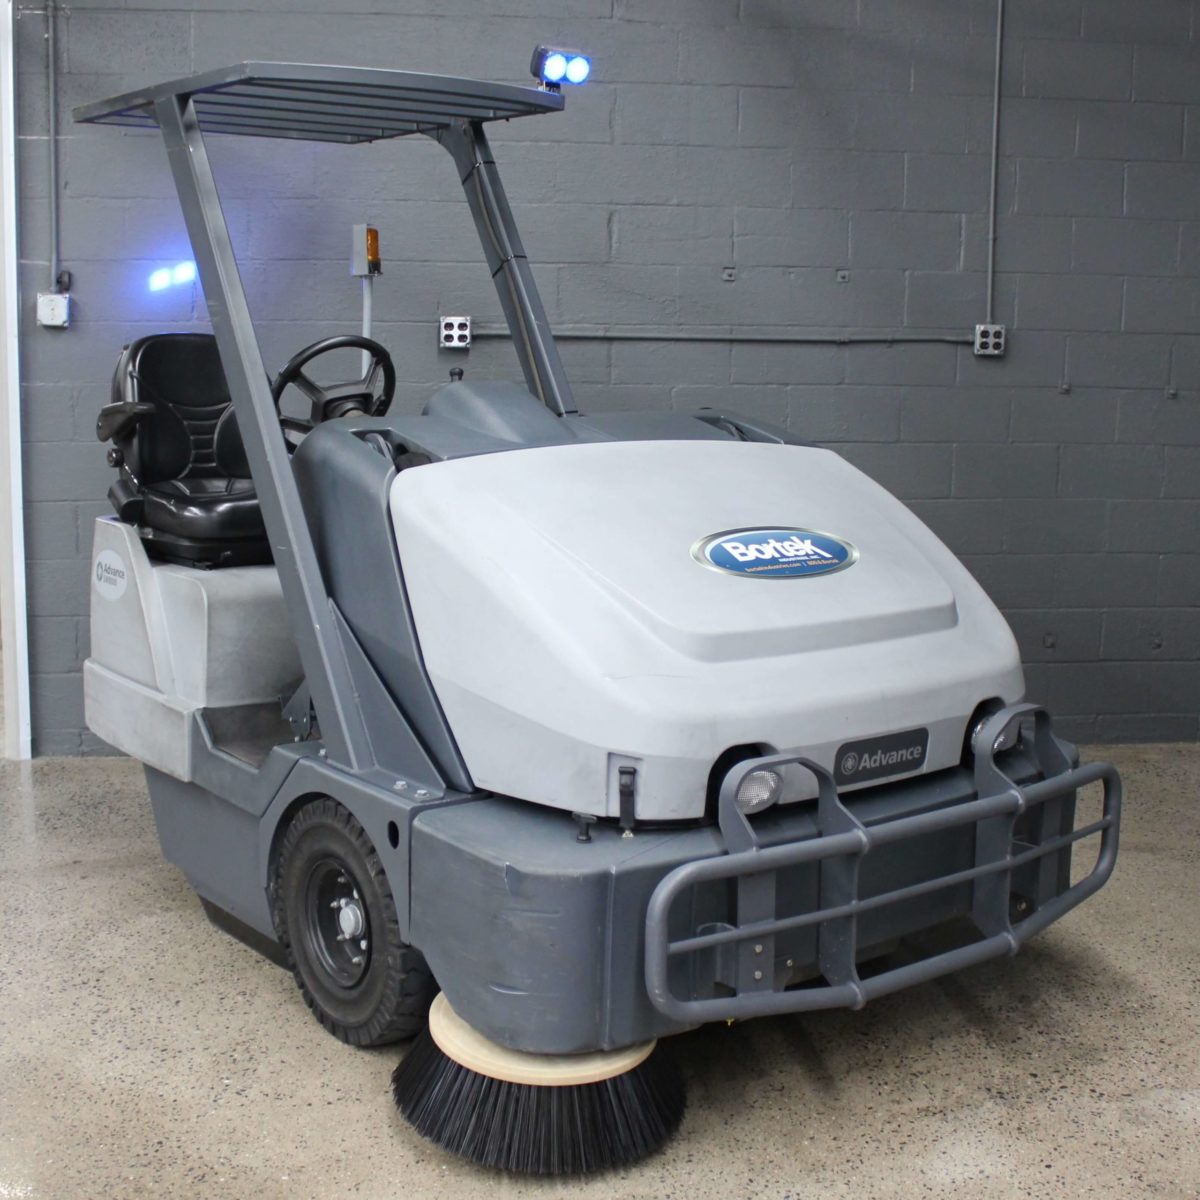 Advance SW8000 Sweeper Reconditioned